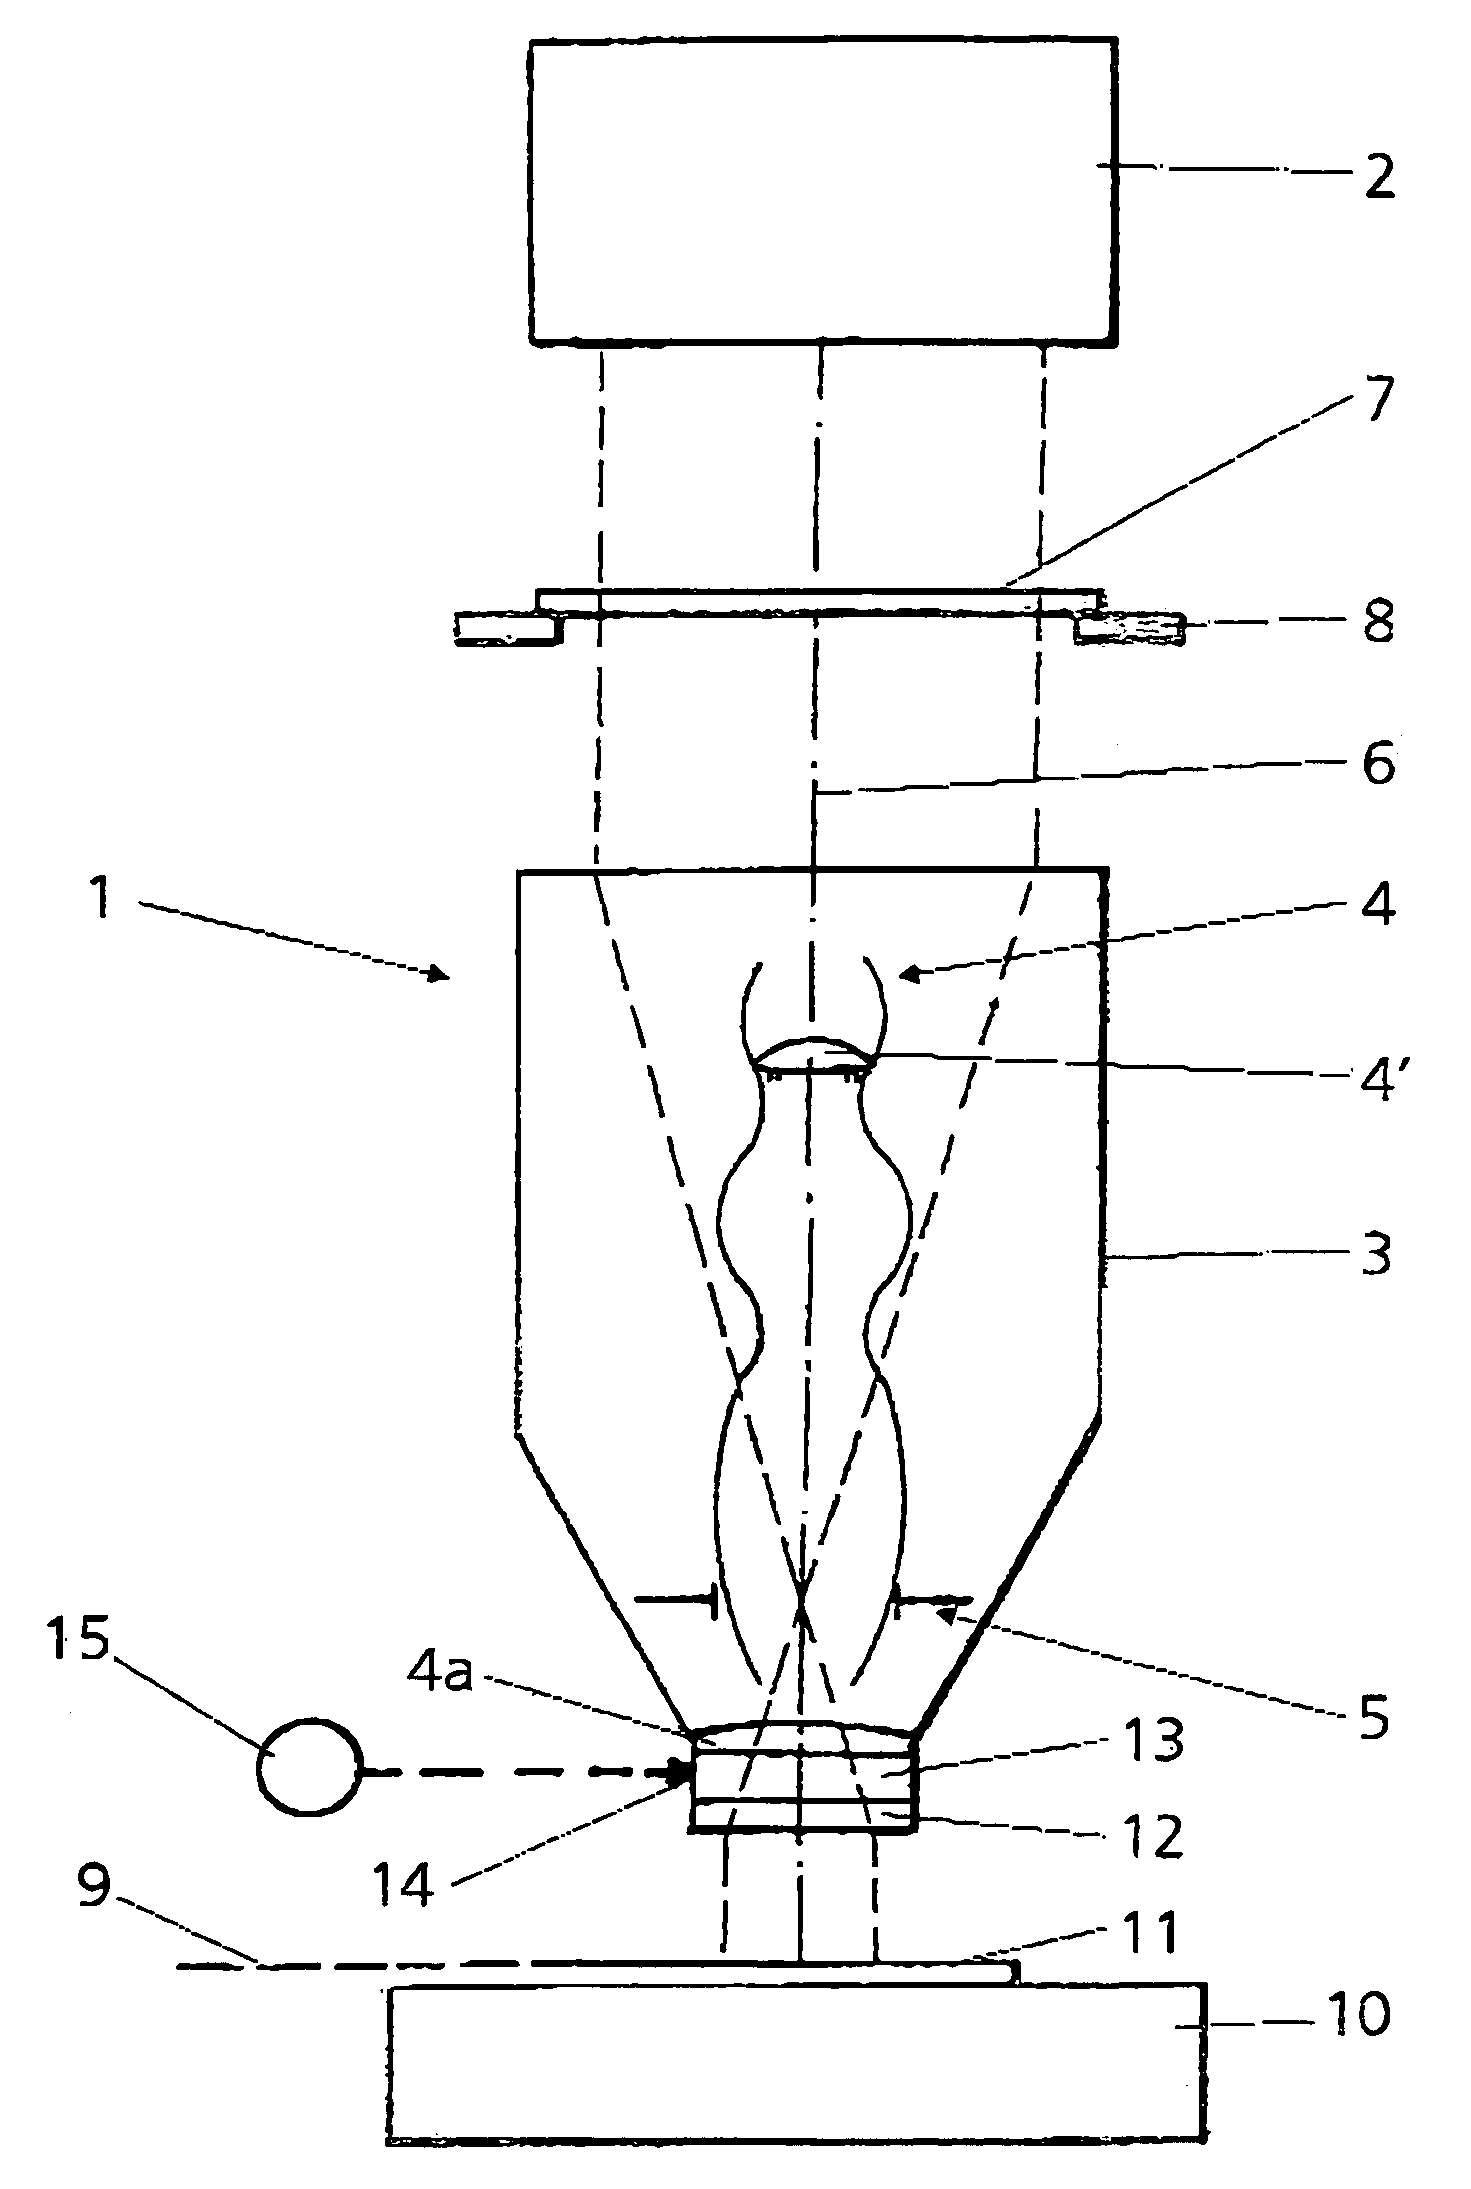 Projection exposure machine comprising a projection lens